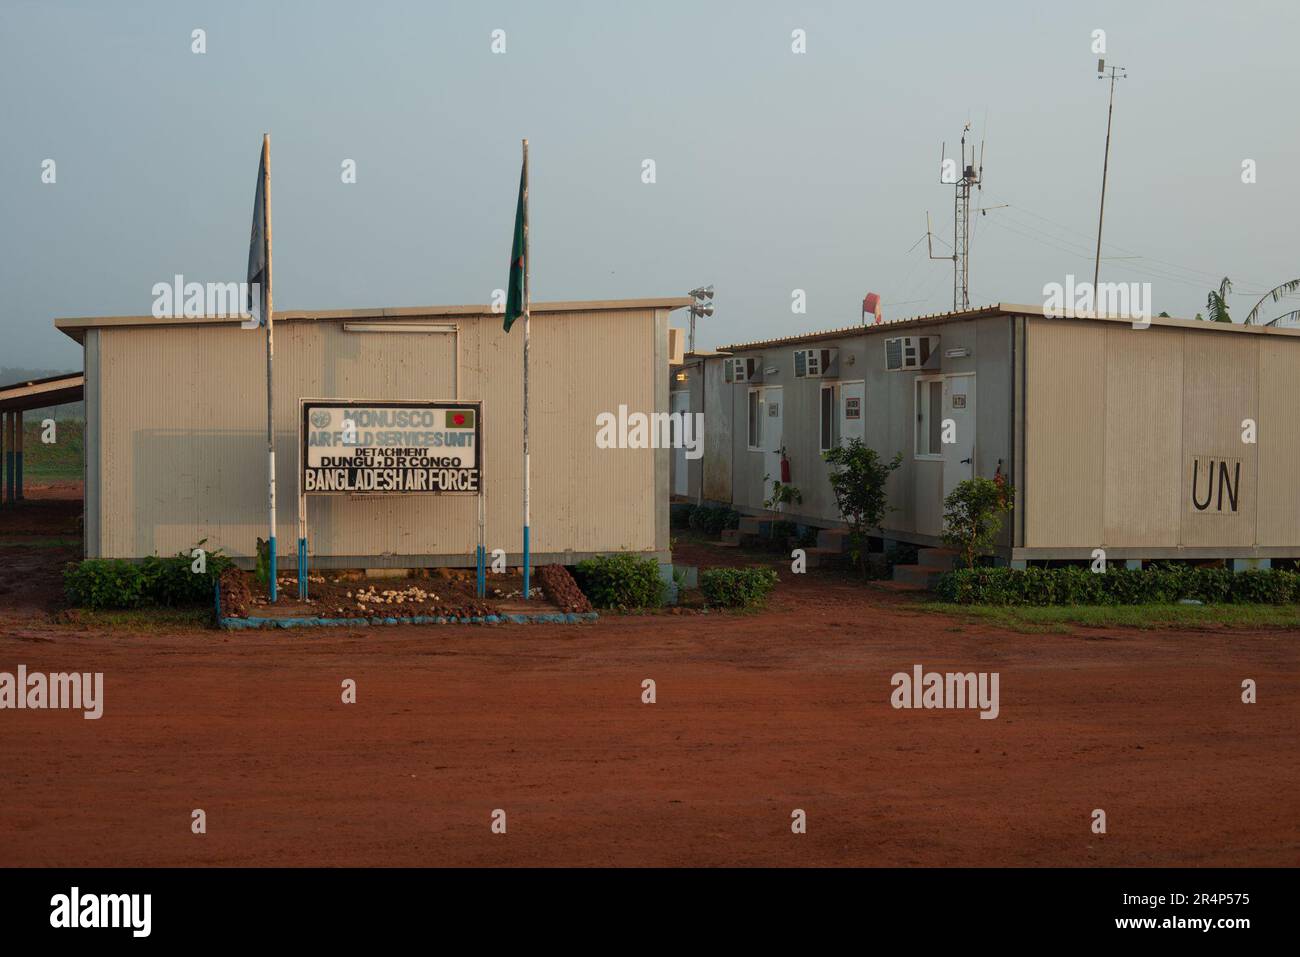 Bangladesh Air Force HQ at Dungu Airfield, part of the MONUSCO UN peacekeeping force, DR Congo Stock Photo